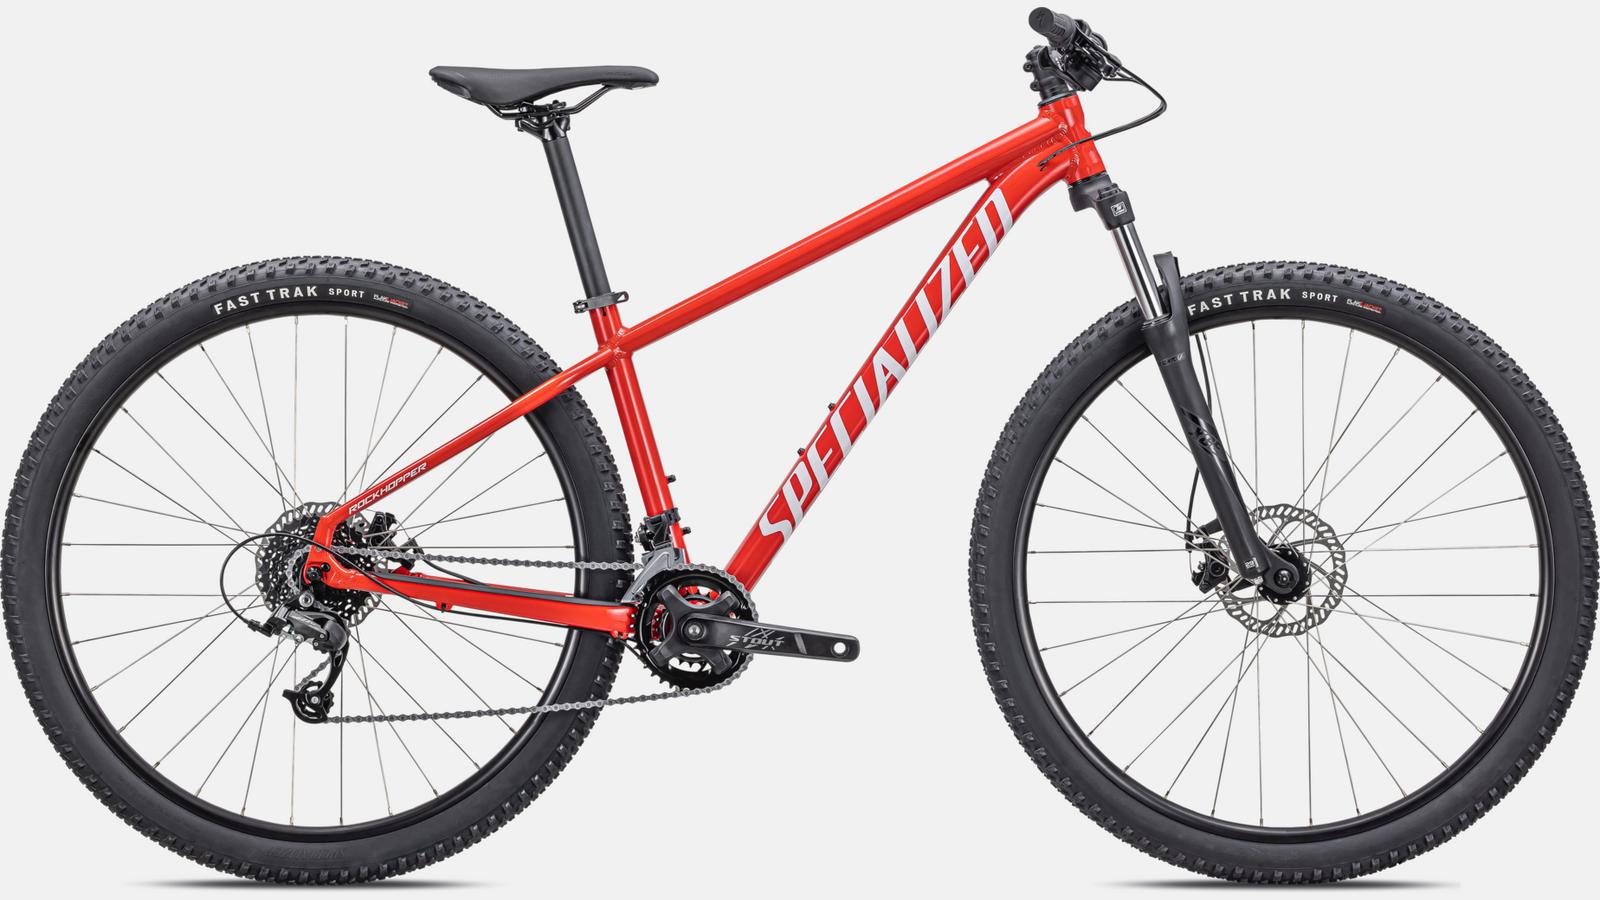 Touch-up paint for 2022 Specialized Rockhopper 29 - Gloss Flo Red